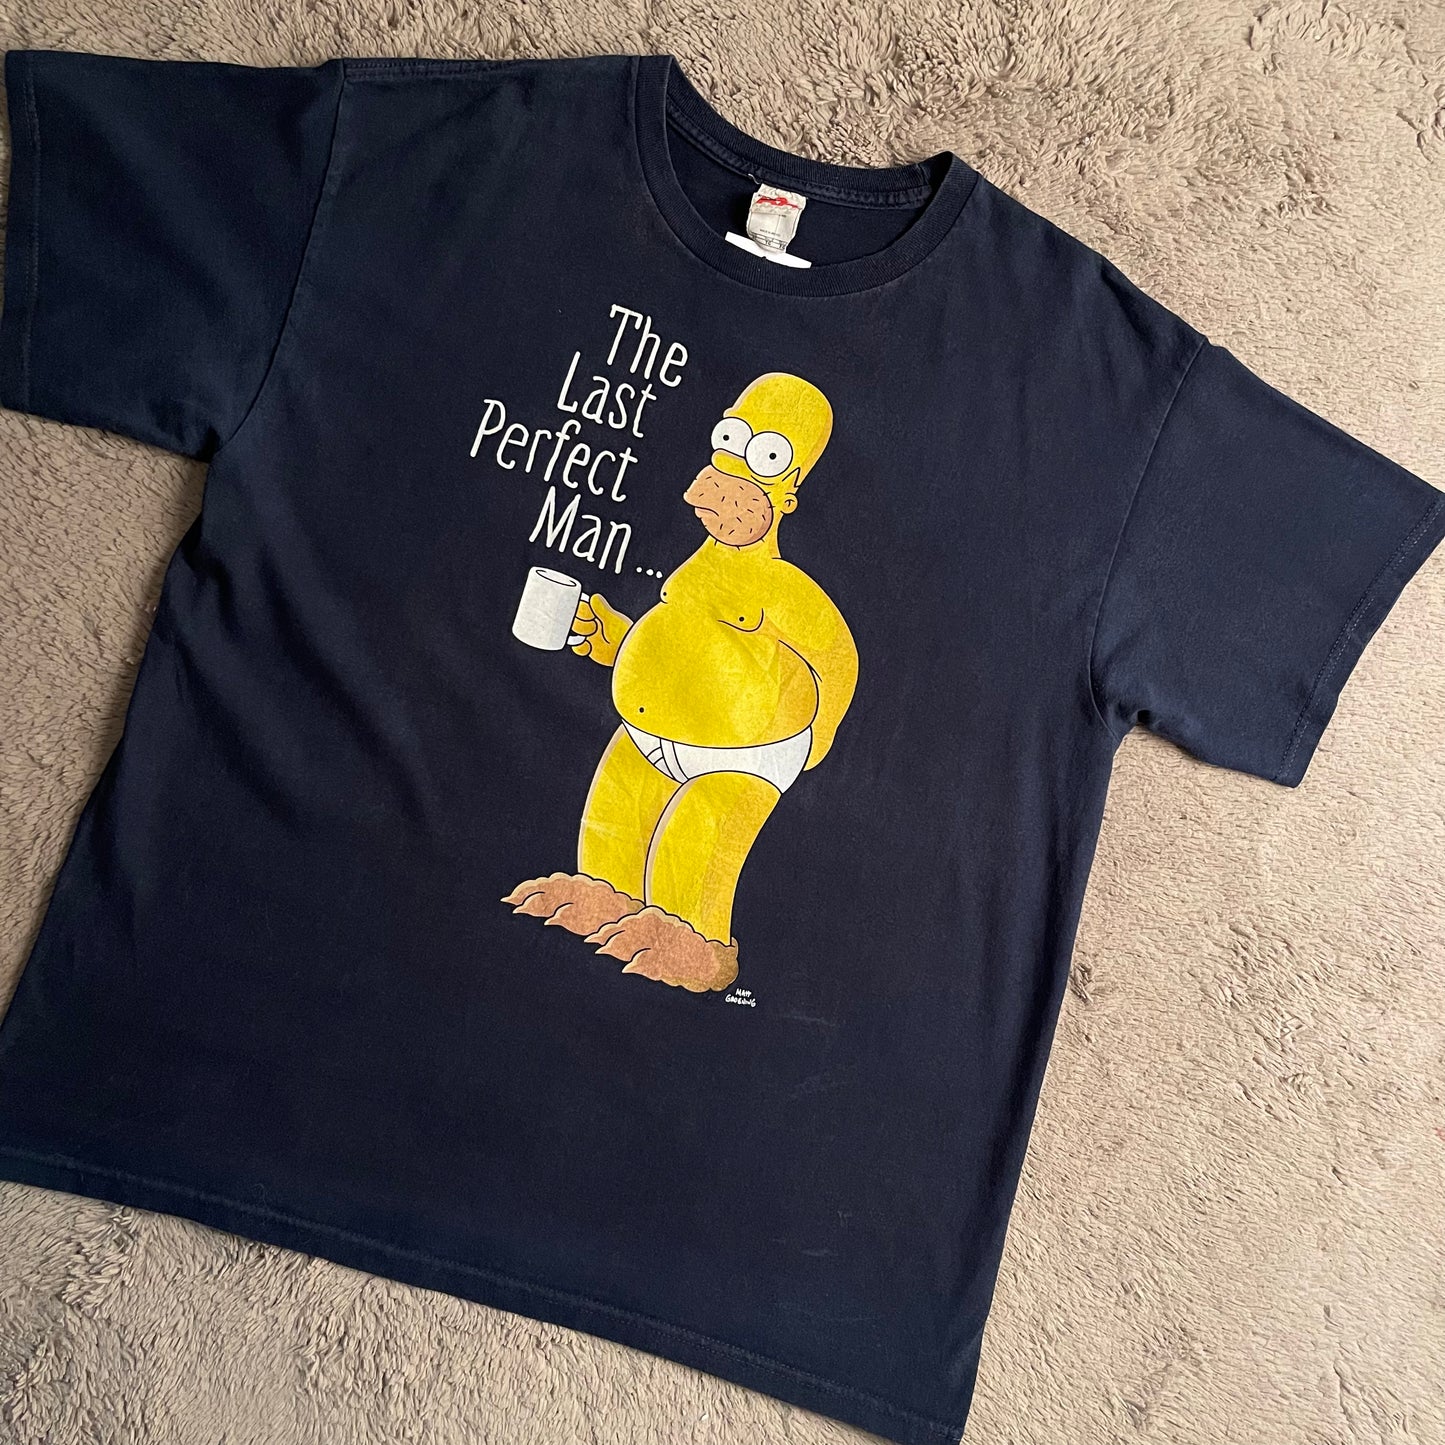 Homer Simpson "The Last Perfect Man" Graphic Tee (XL)